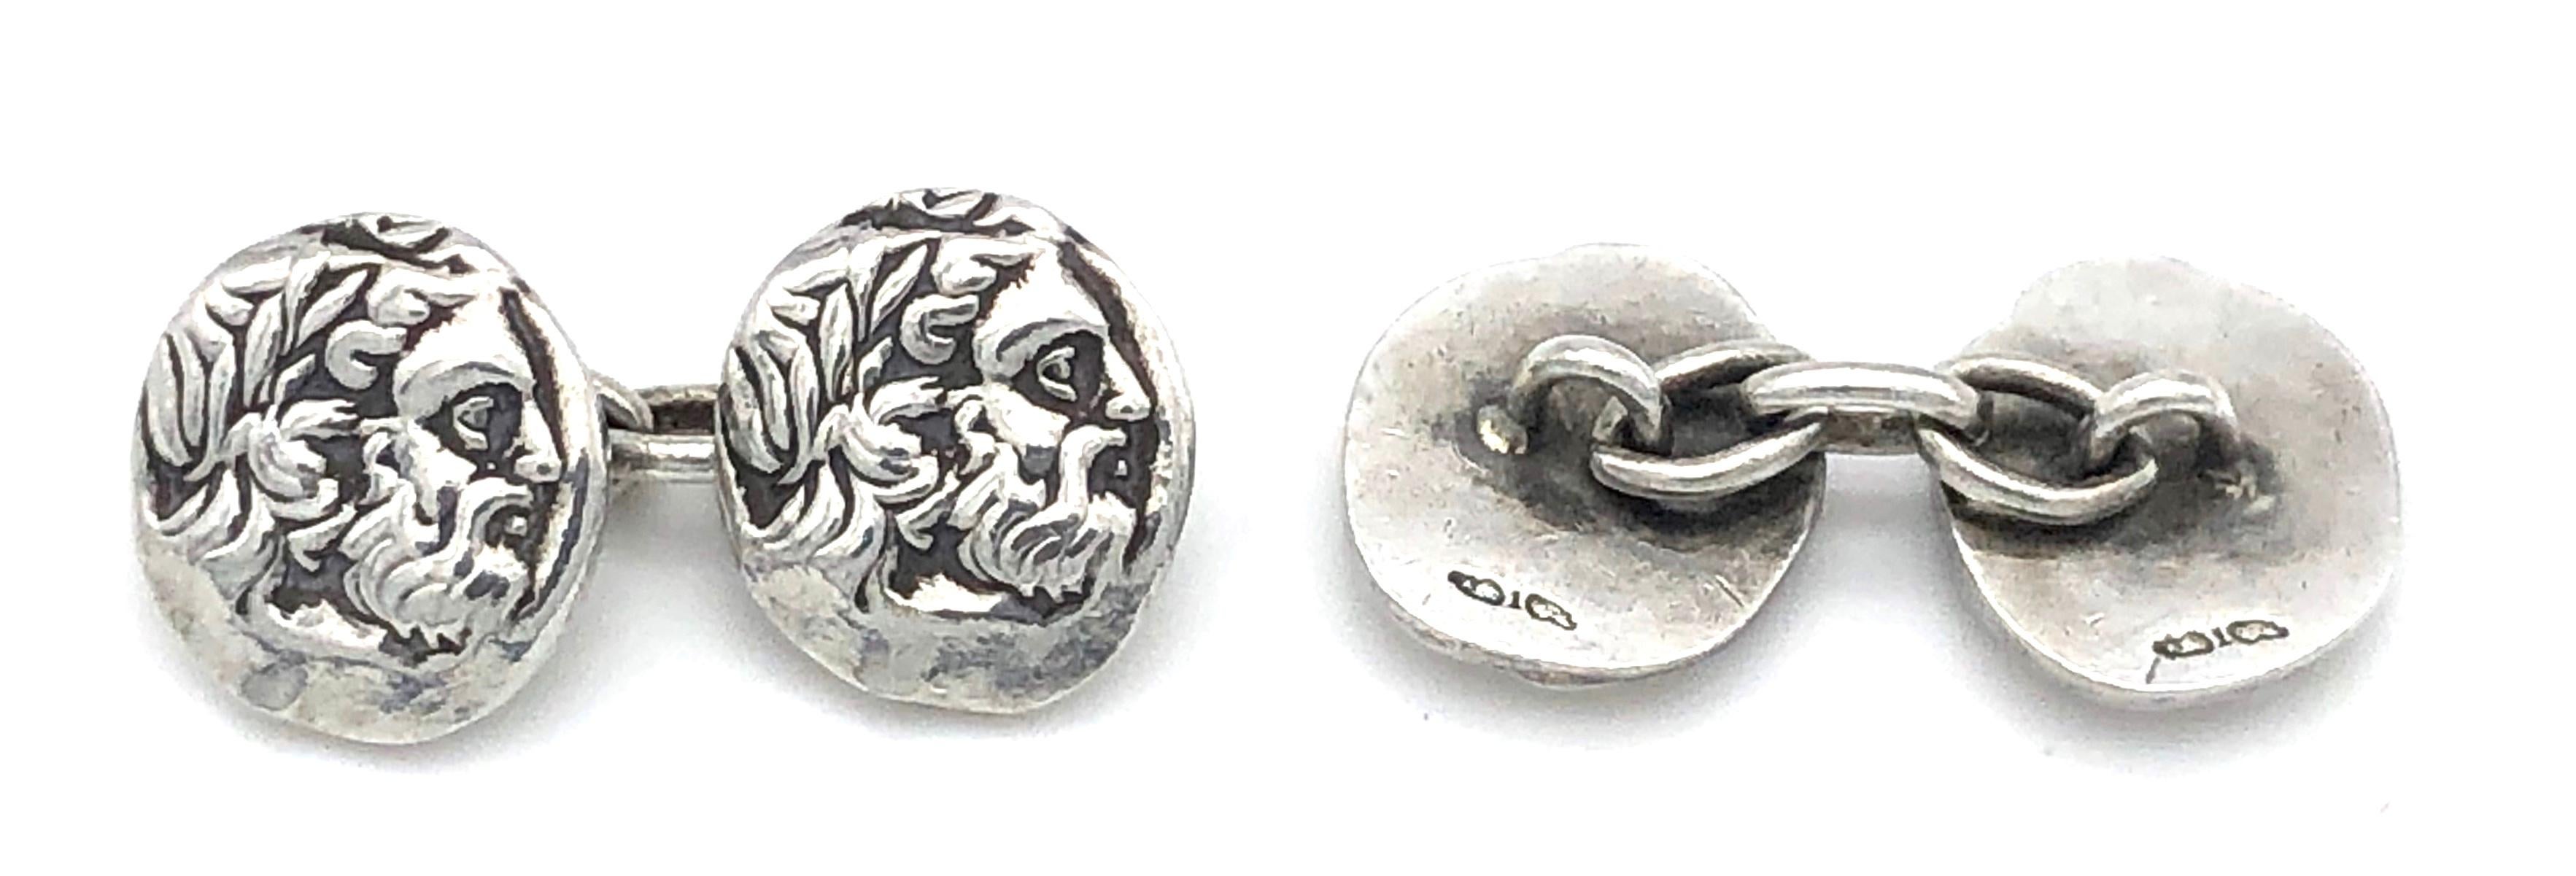 Casts of silver coins from antiquity depicting the profile of a bearded dignitary wearing a laurel wreath have been made into a pair of unusual cufflinks.